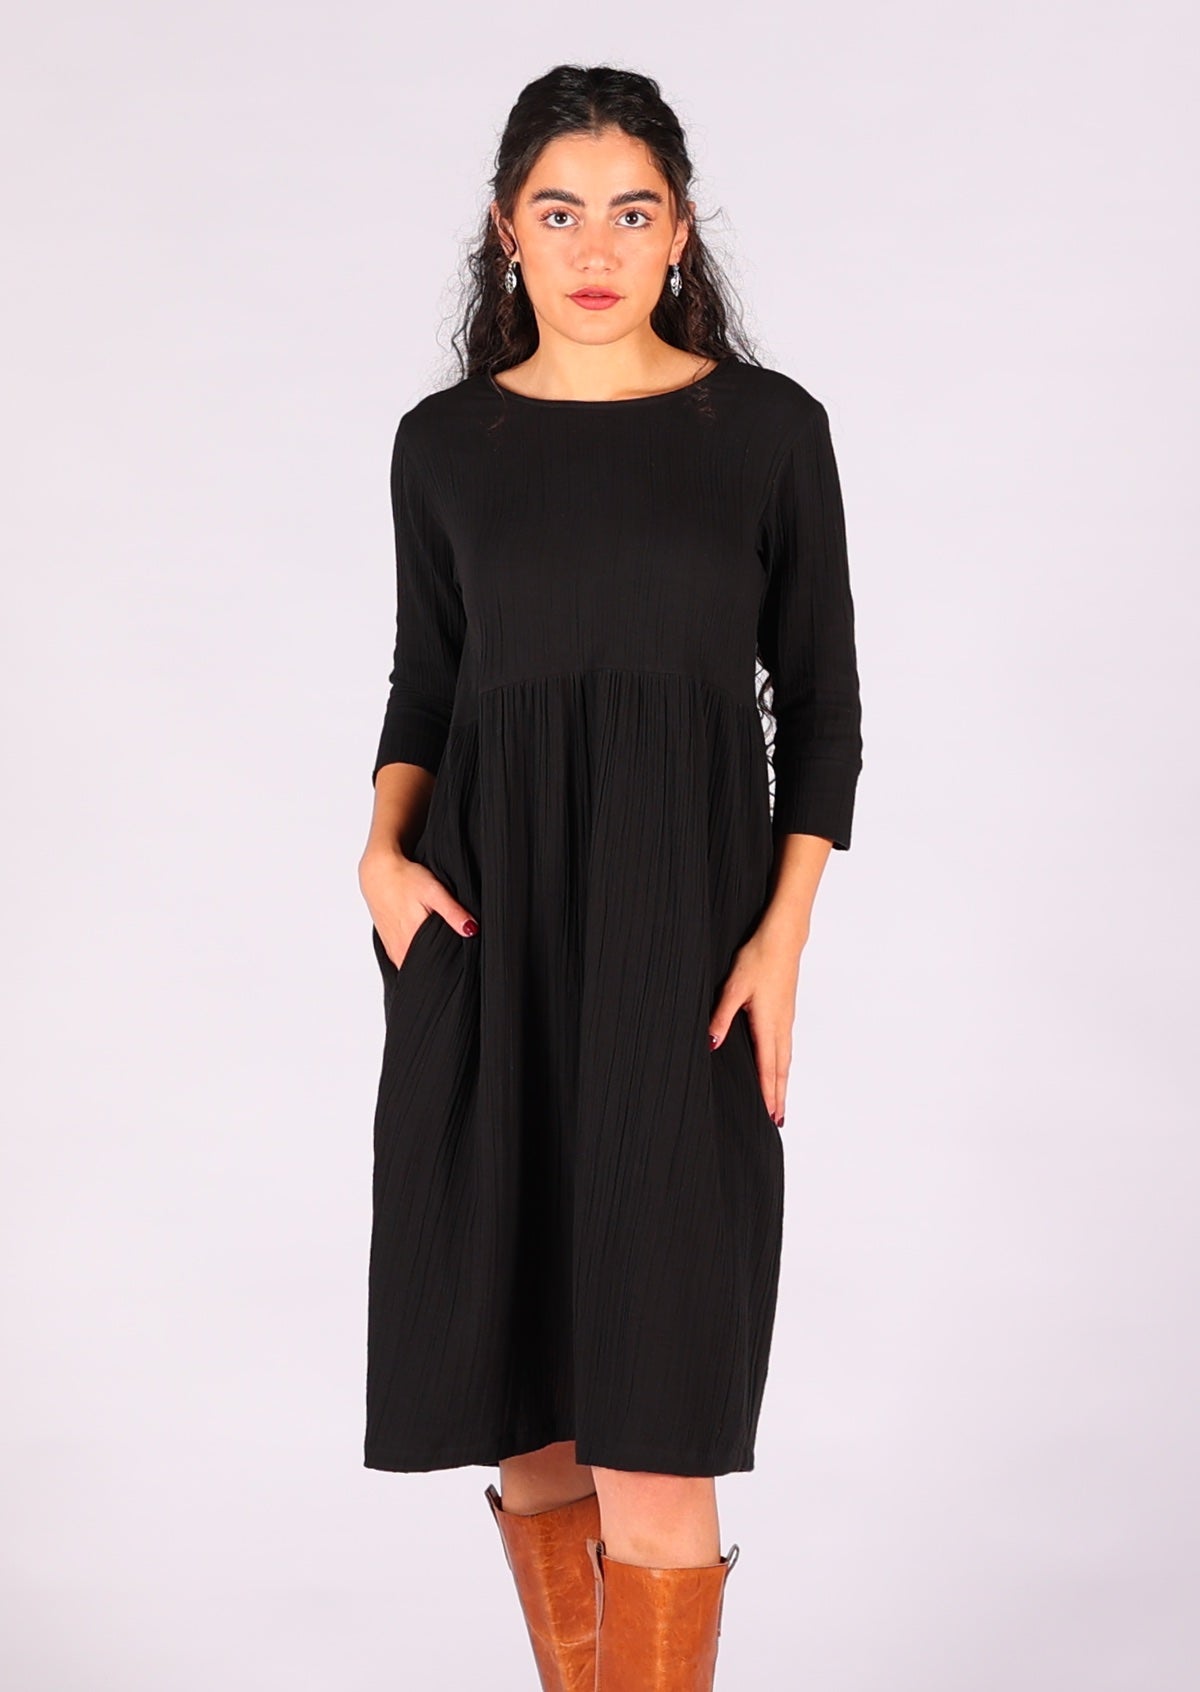 Black double cotton knee length dress with round neckline and hidden side pockets